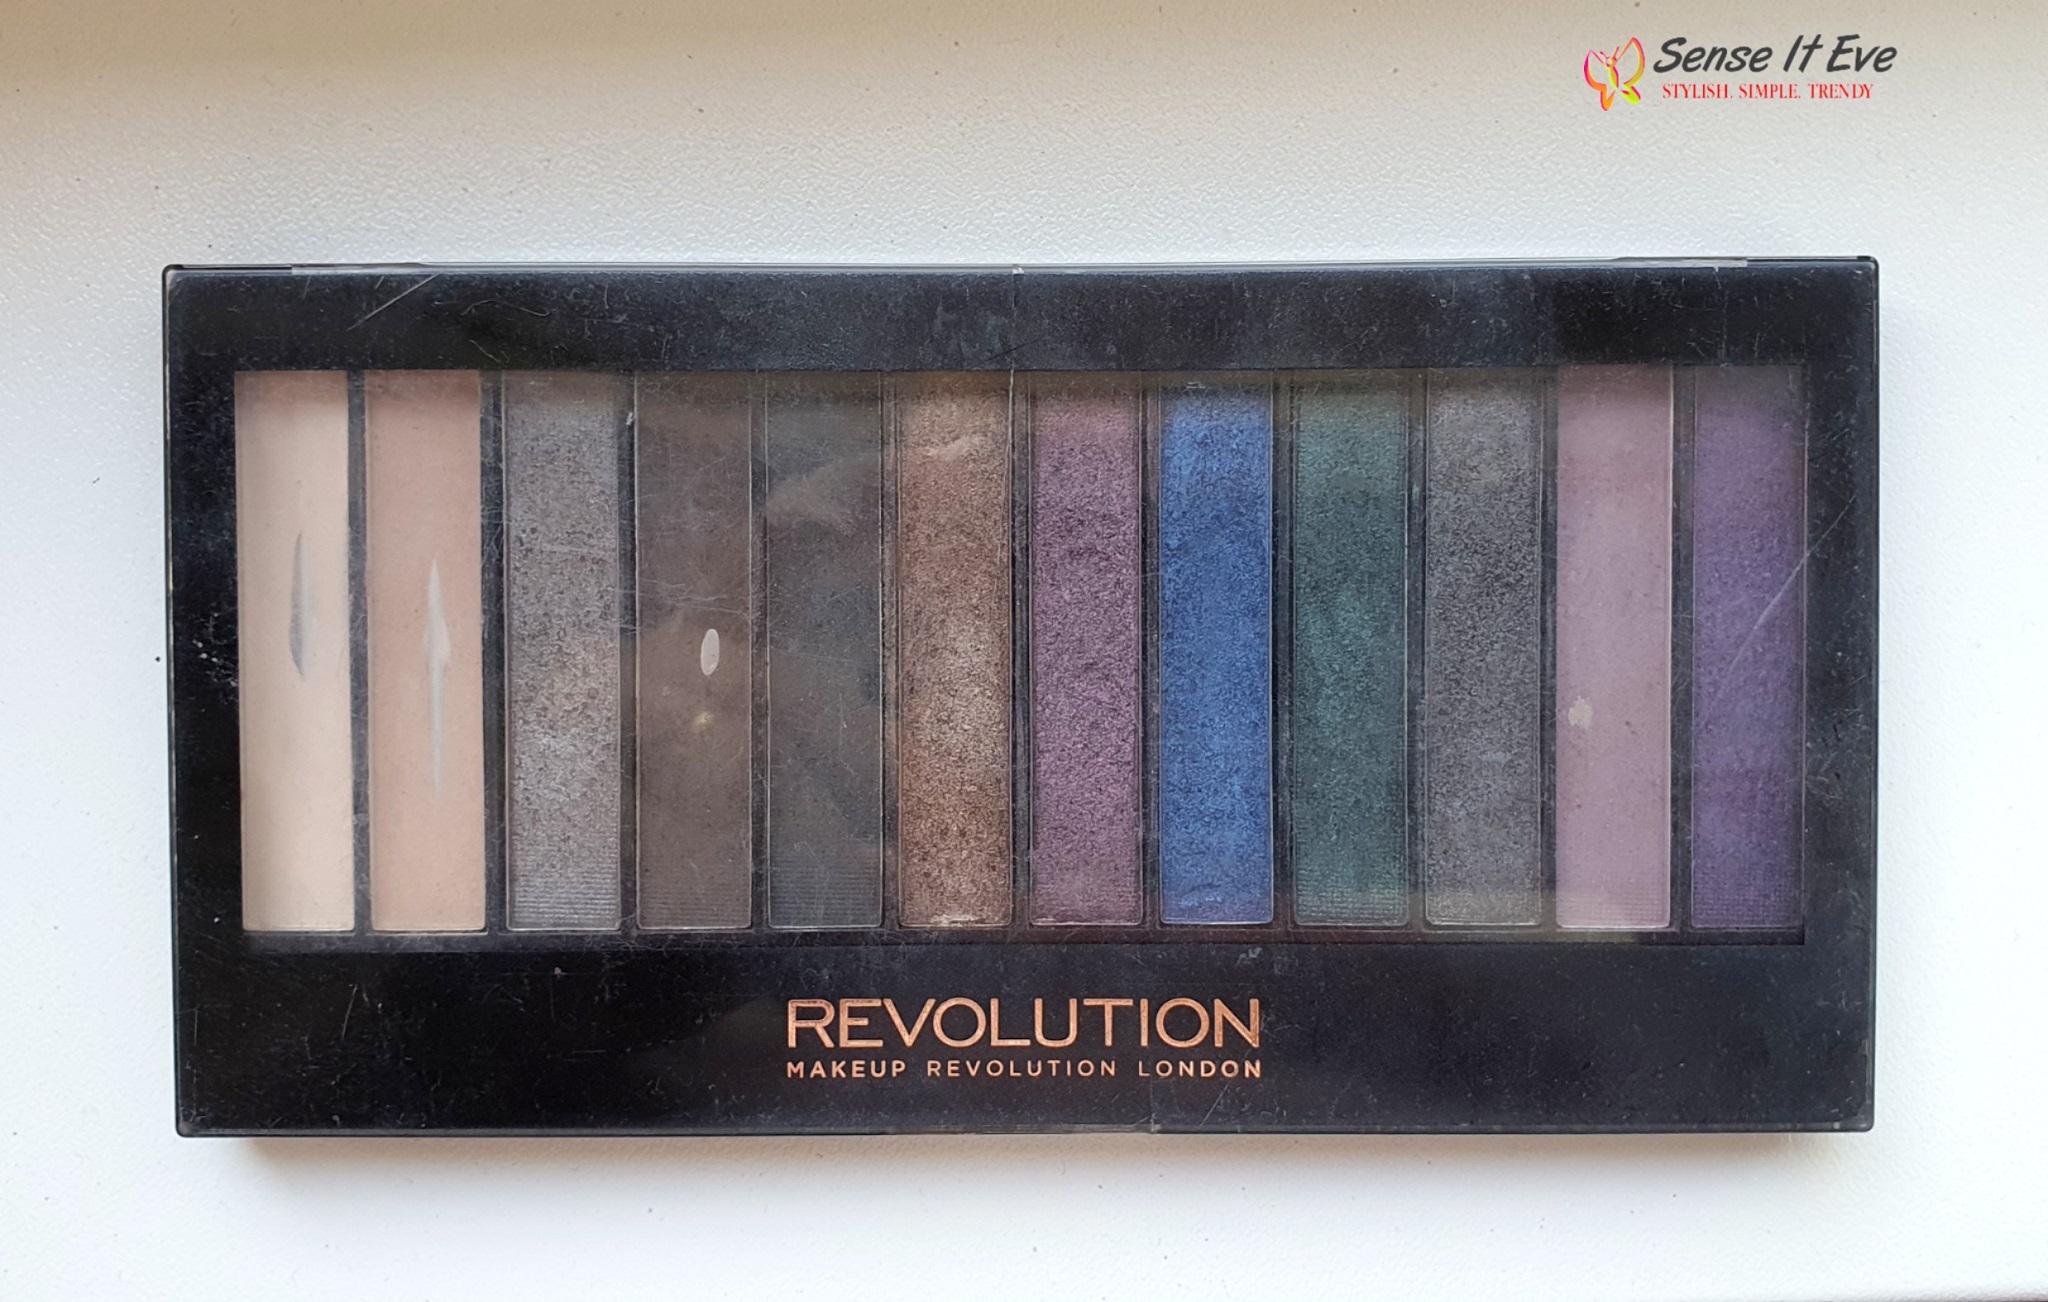 Makeup Revolution Redemption Palette Hot Smoked Sense It Eve Makeup Revolution Redemption Palette Hot Smoked : Review & Swatches